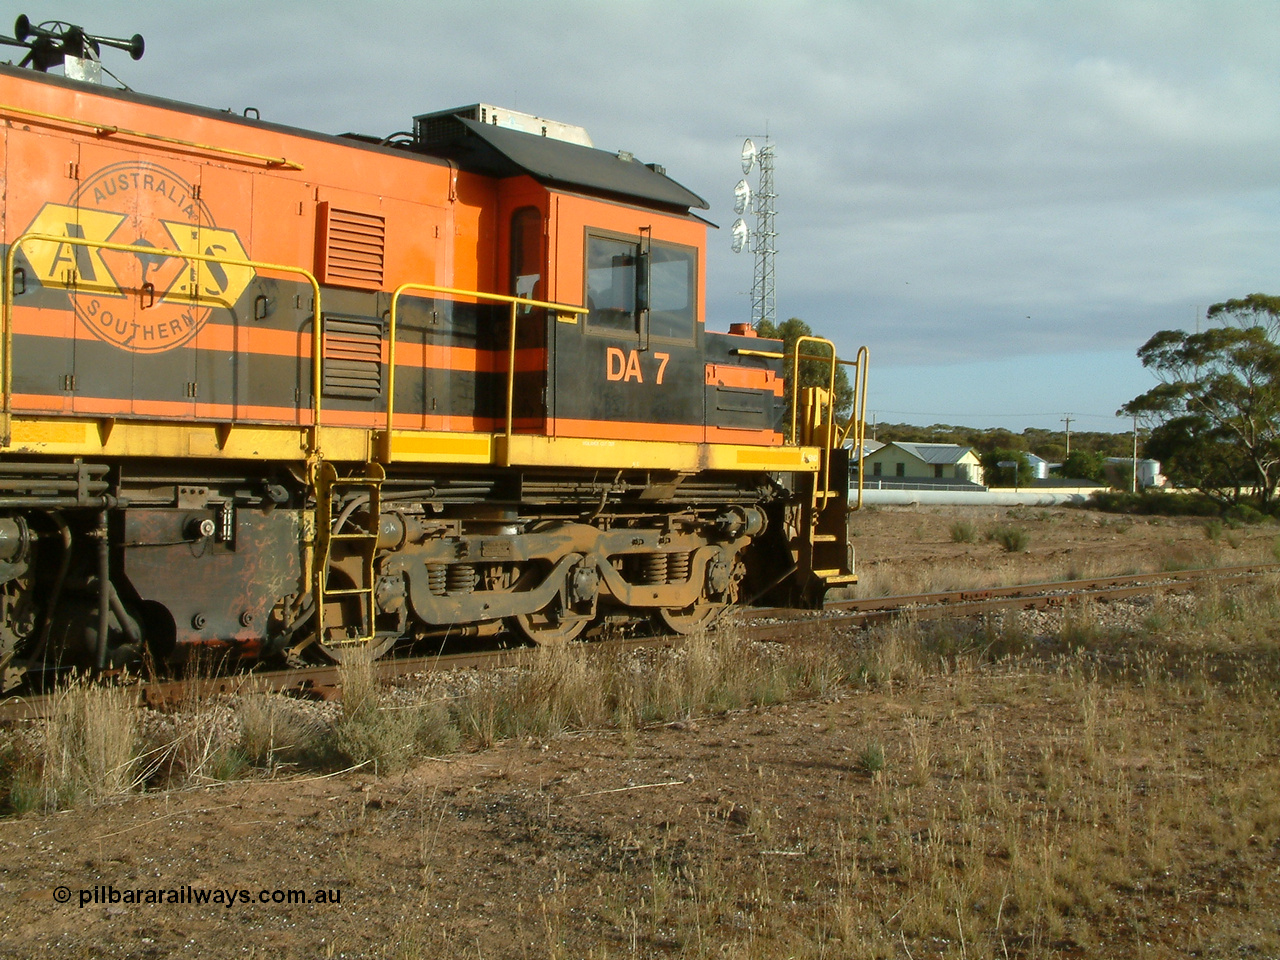 030409 081001
Warramboo, cab side shot of rebuild DA class unit DA 7 in Australian Southern orange and black livery shows its original heritage body style of an NSWGR 48 class 4813 AE Goodwin ALCo model DL531 serial 83713, rebuilt by Islington Workshops SA with long hood and parts from former 830 class 870 AE Goodwin ALCo model DL531 serial G6016-06 in 1998.
Keywords: DA-class;DA7;83713;Port-Augusta-WS;ALCo;DL531G/1;48-class;4813;rebuild;